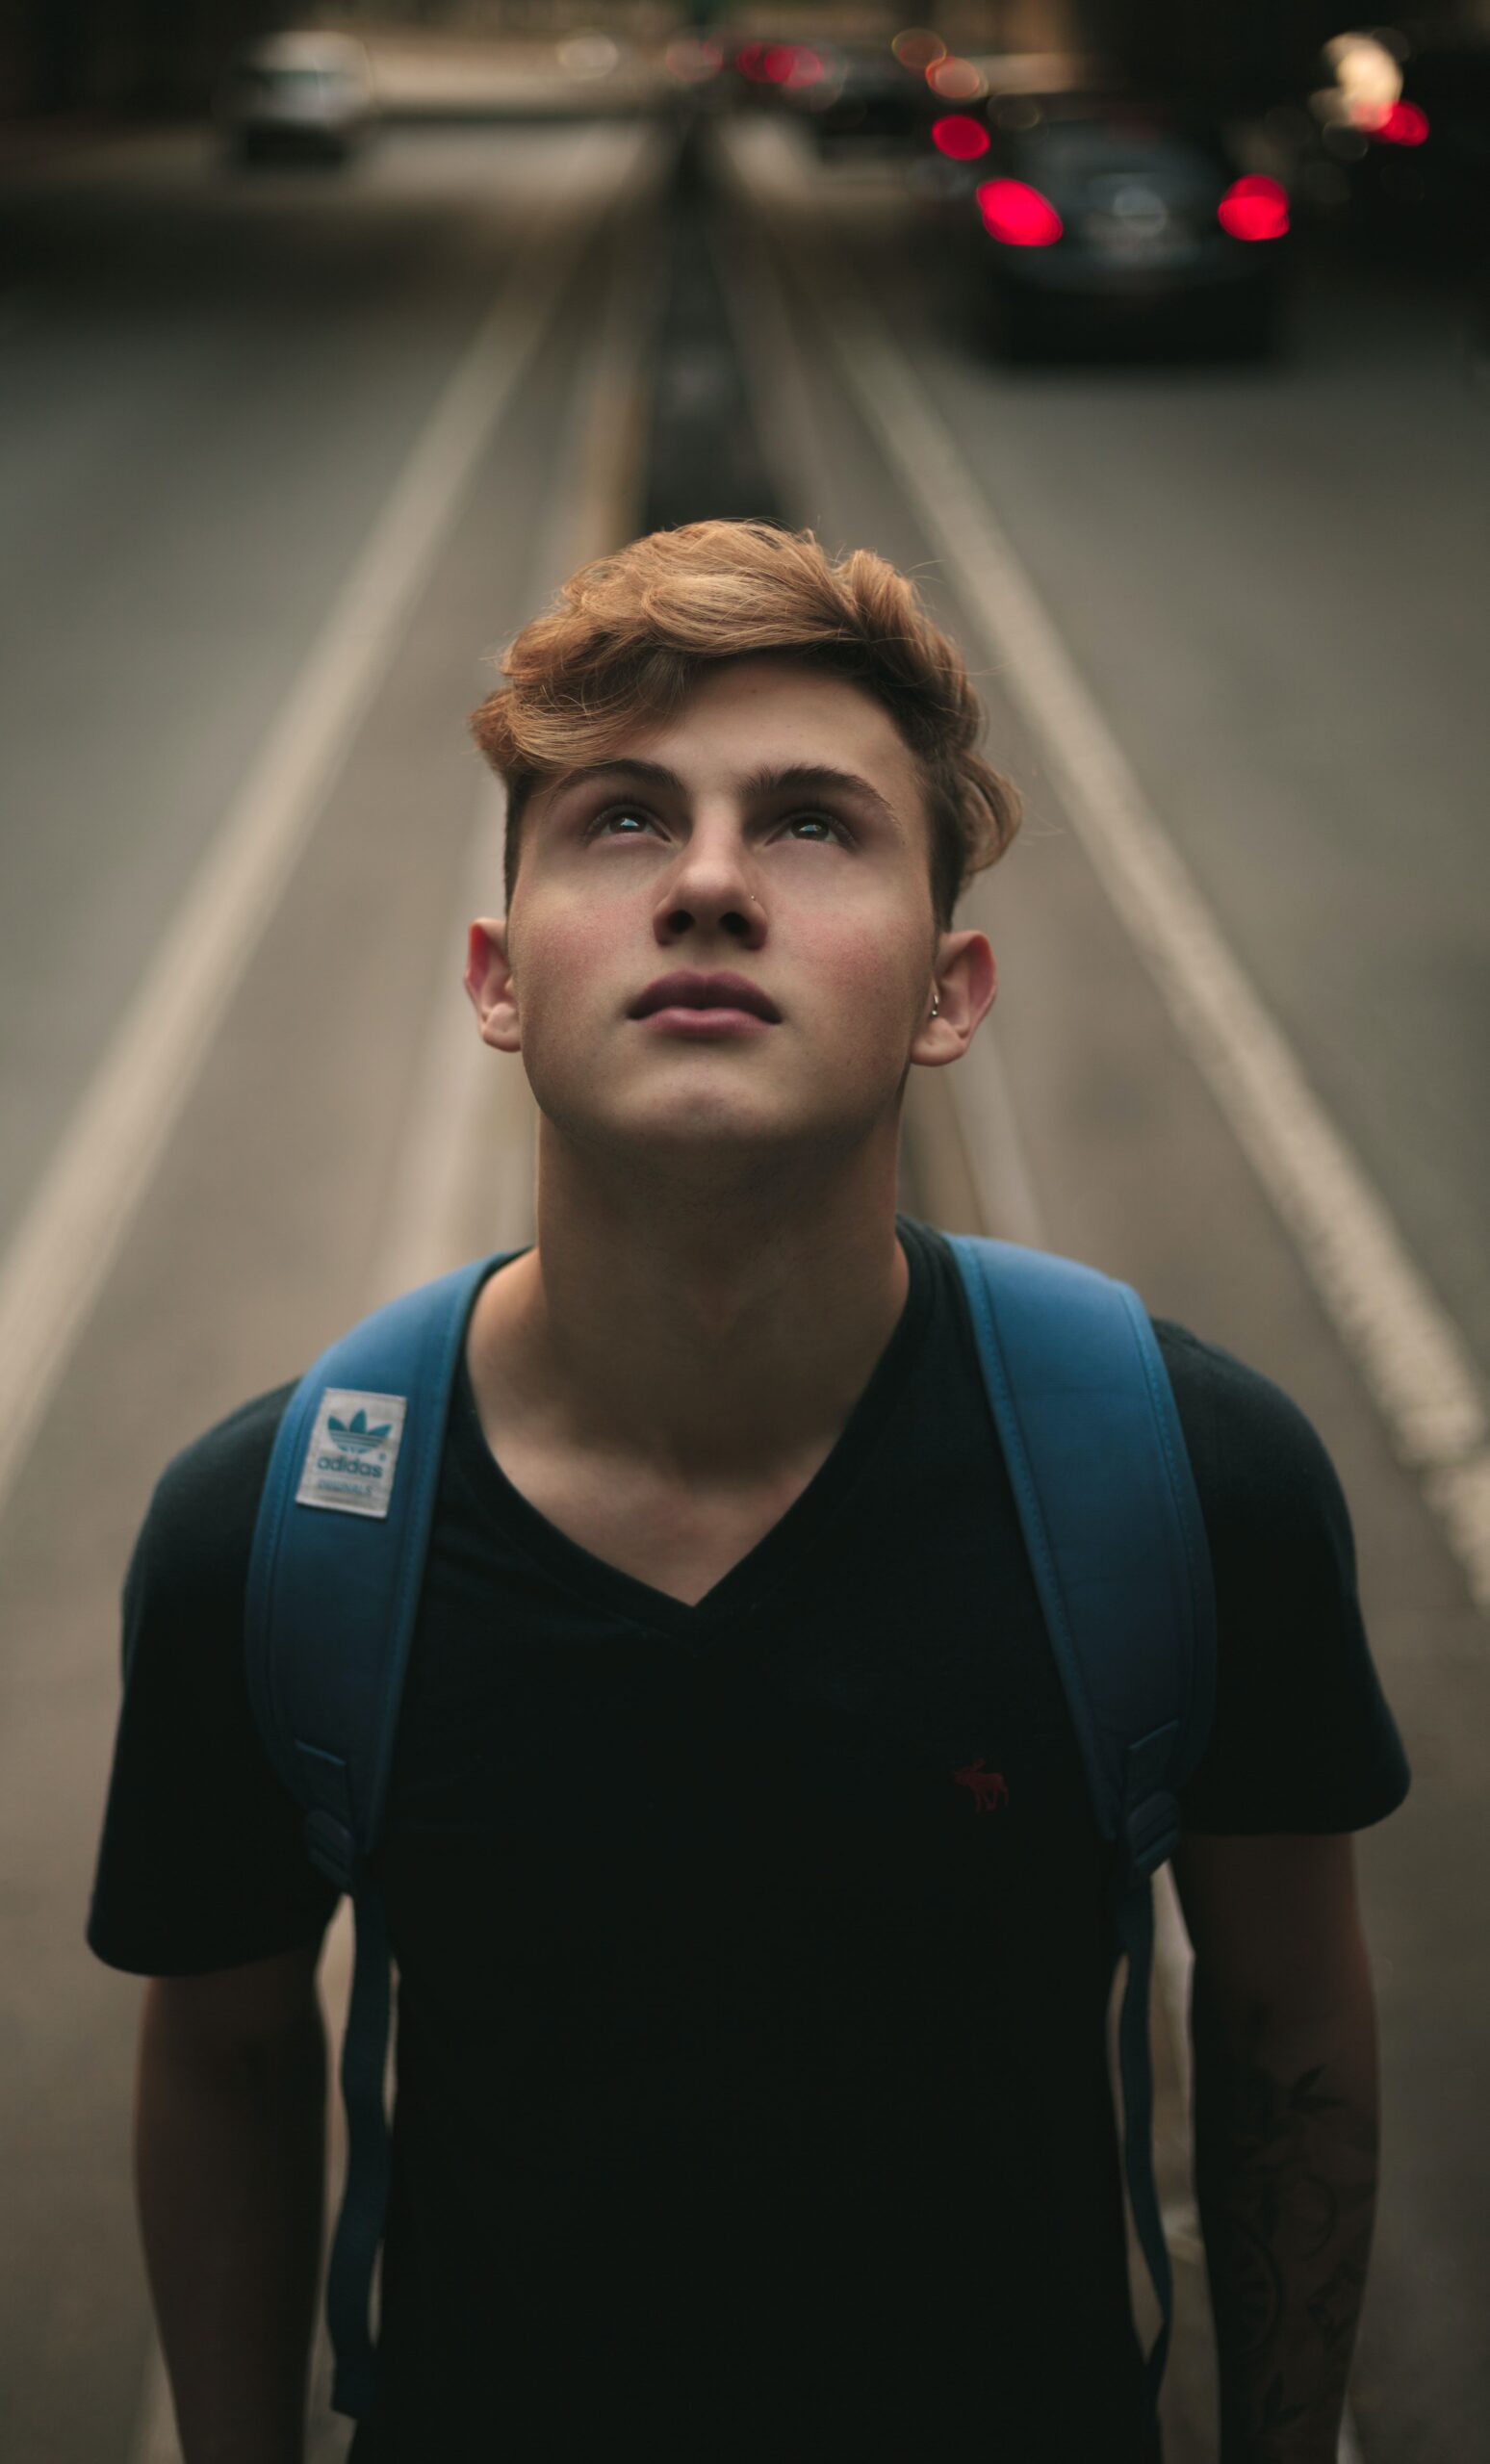 Young man with a backpack standing on a street, looking upwards with a thoughtful expression, cars and tram tracks blurred in the background.